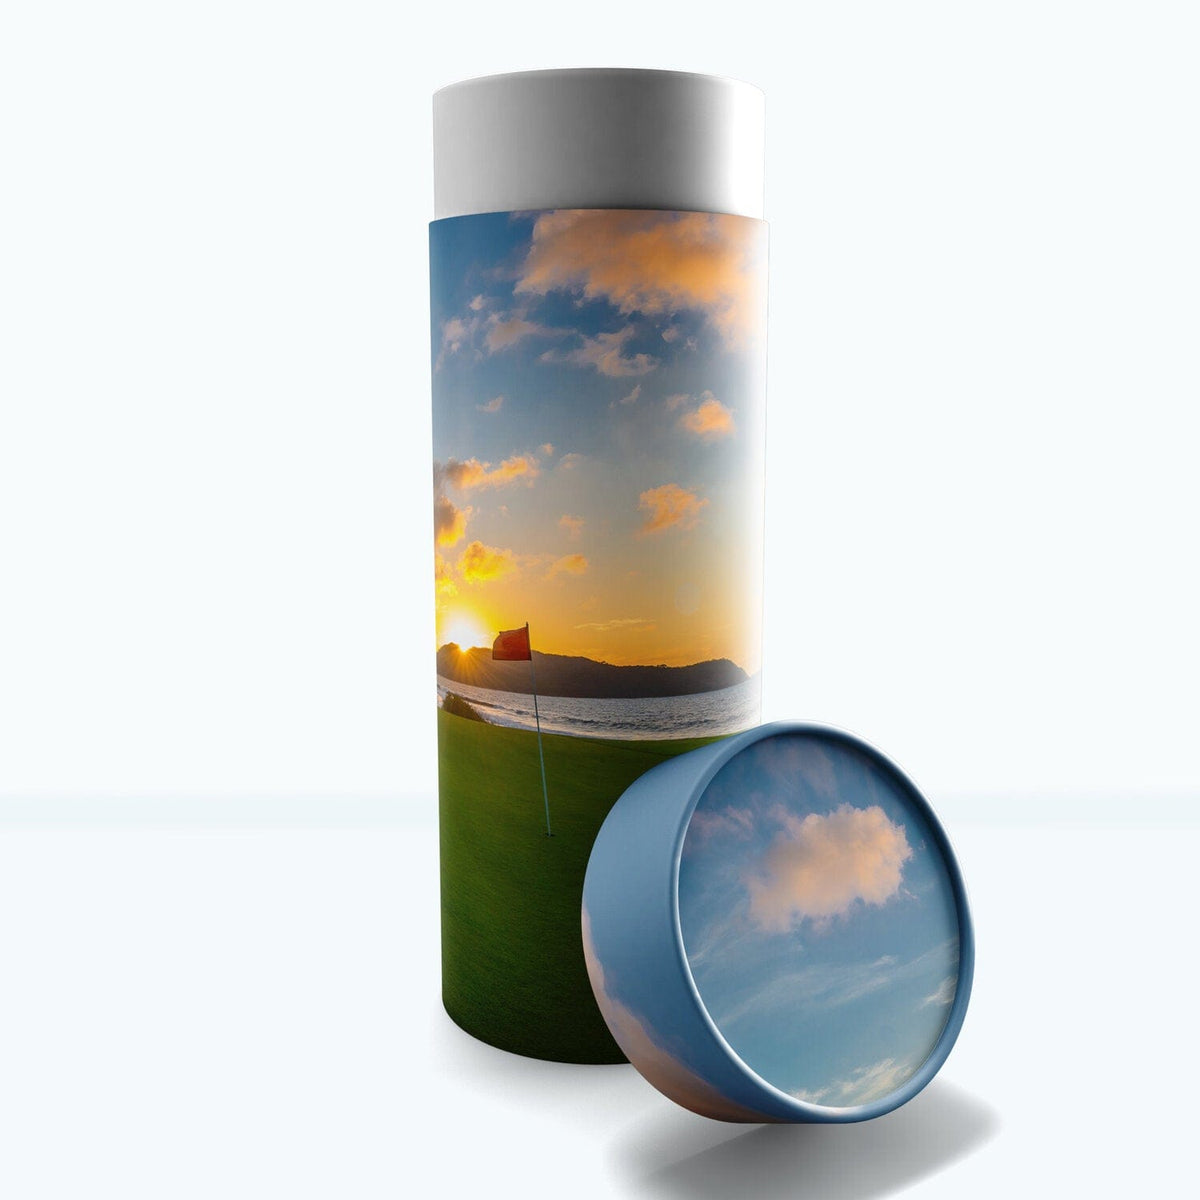 Commemorative Cremation Urns Scattering Tube 19th Hole Golf Biodegradable &amp; Eco Friendly Burial or Scattering Urn / Tube